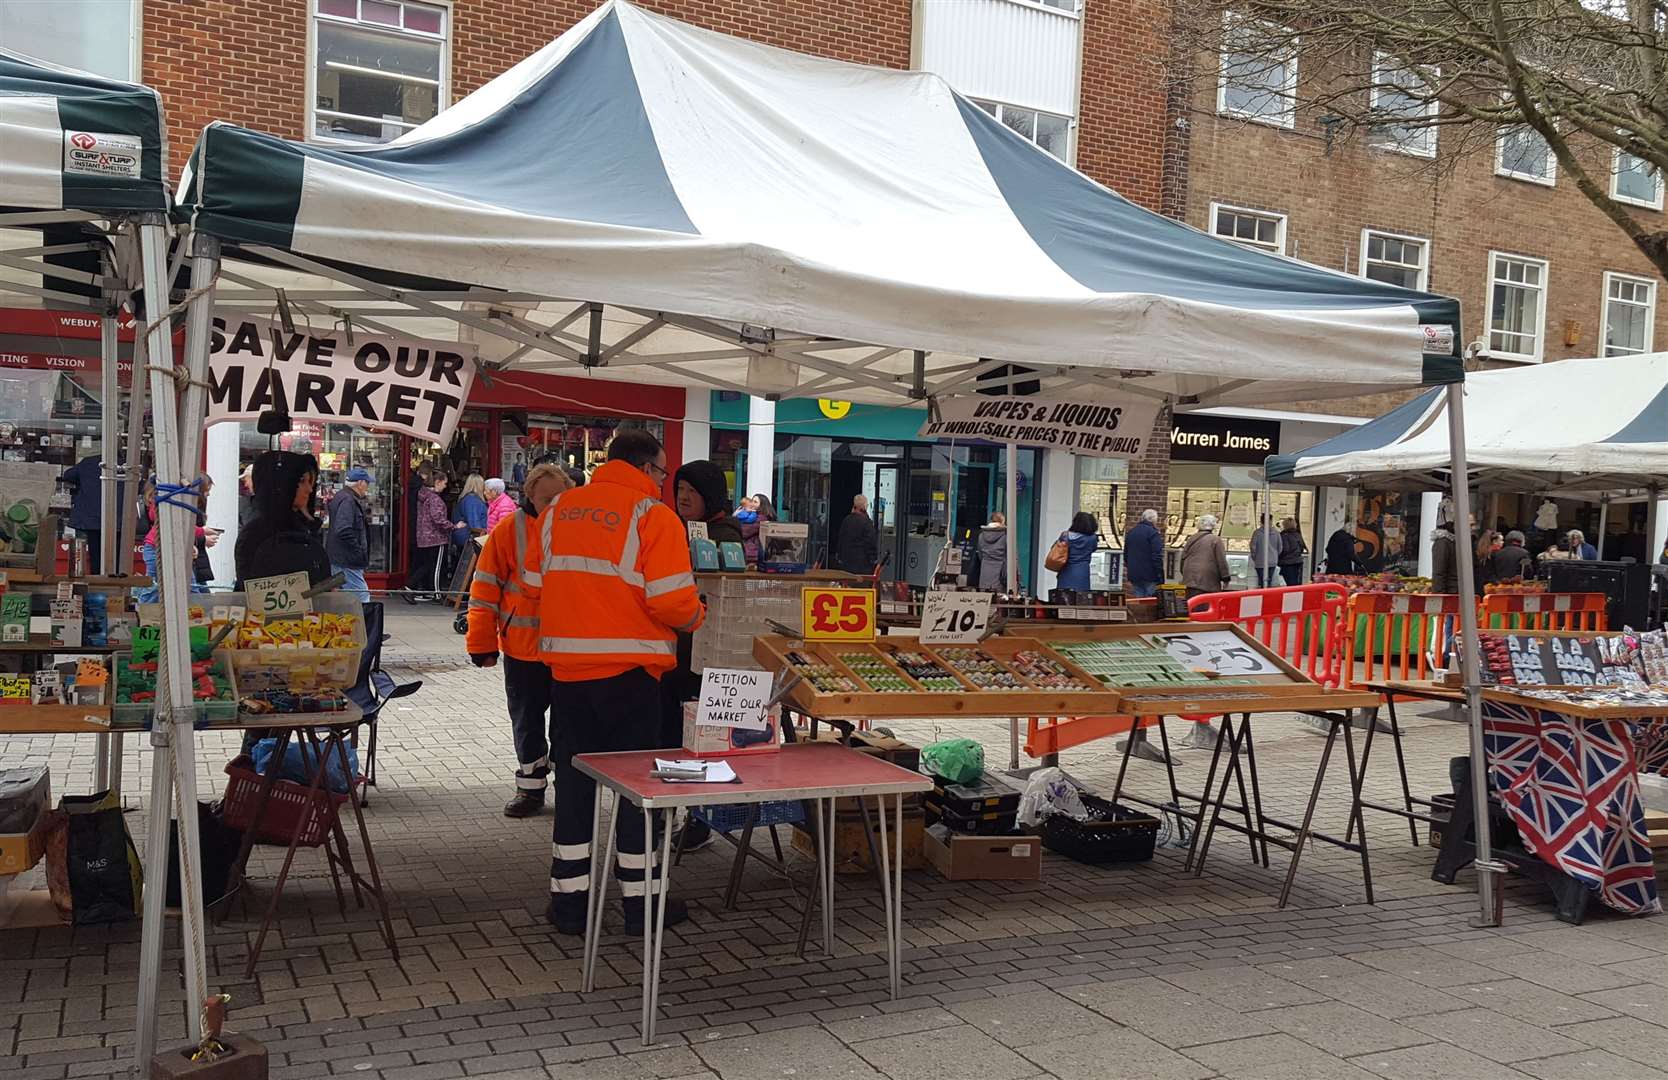 A petition has been launched to save the market in Canterbury city centre (29788056)